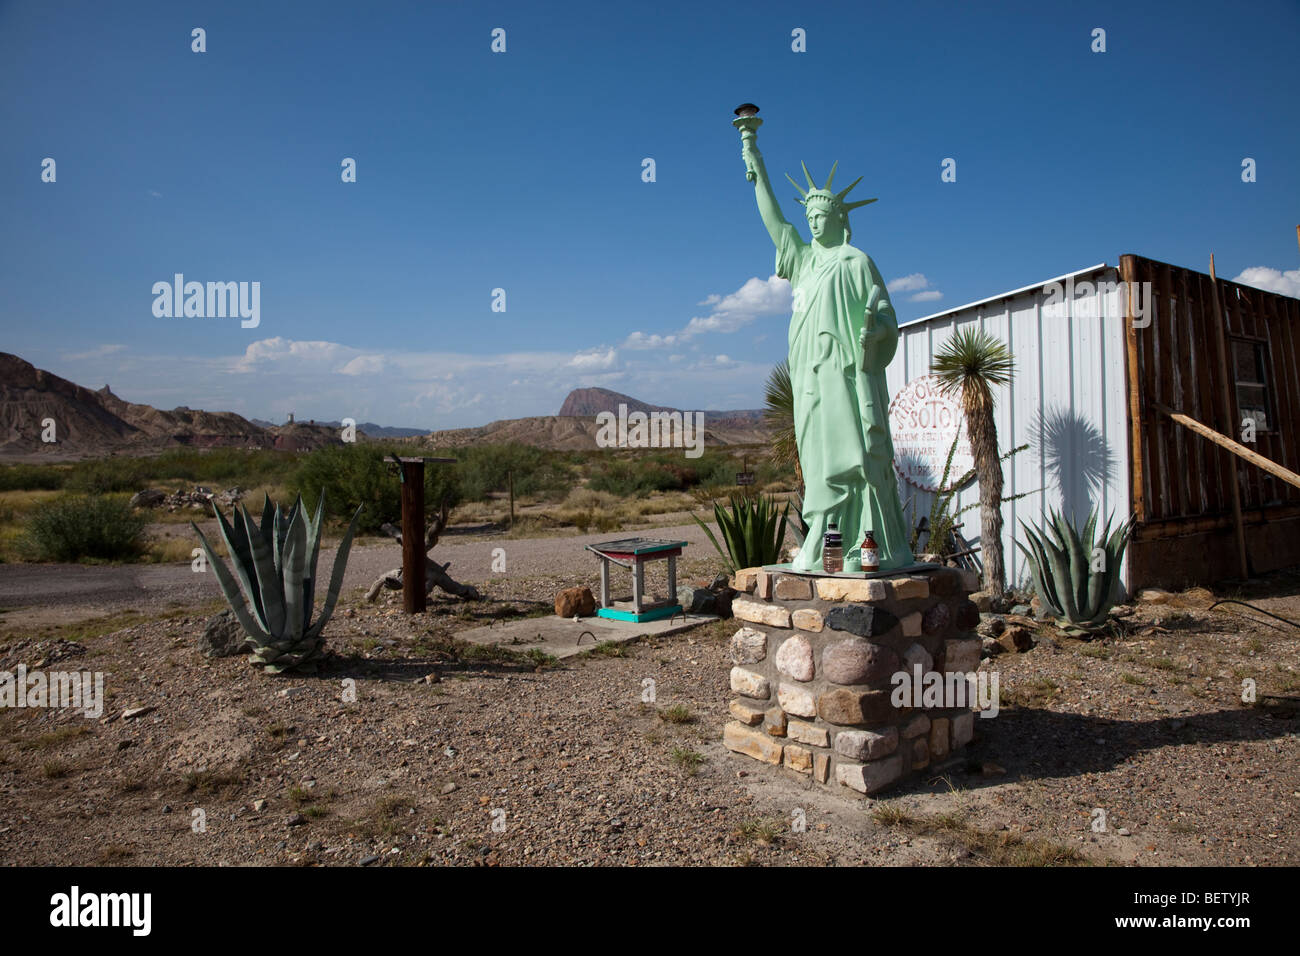 Small version of Statue of Liberty  at roadside Study Butte Texas USA Stock Photo